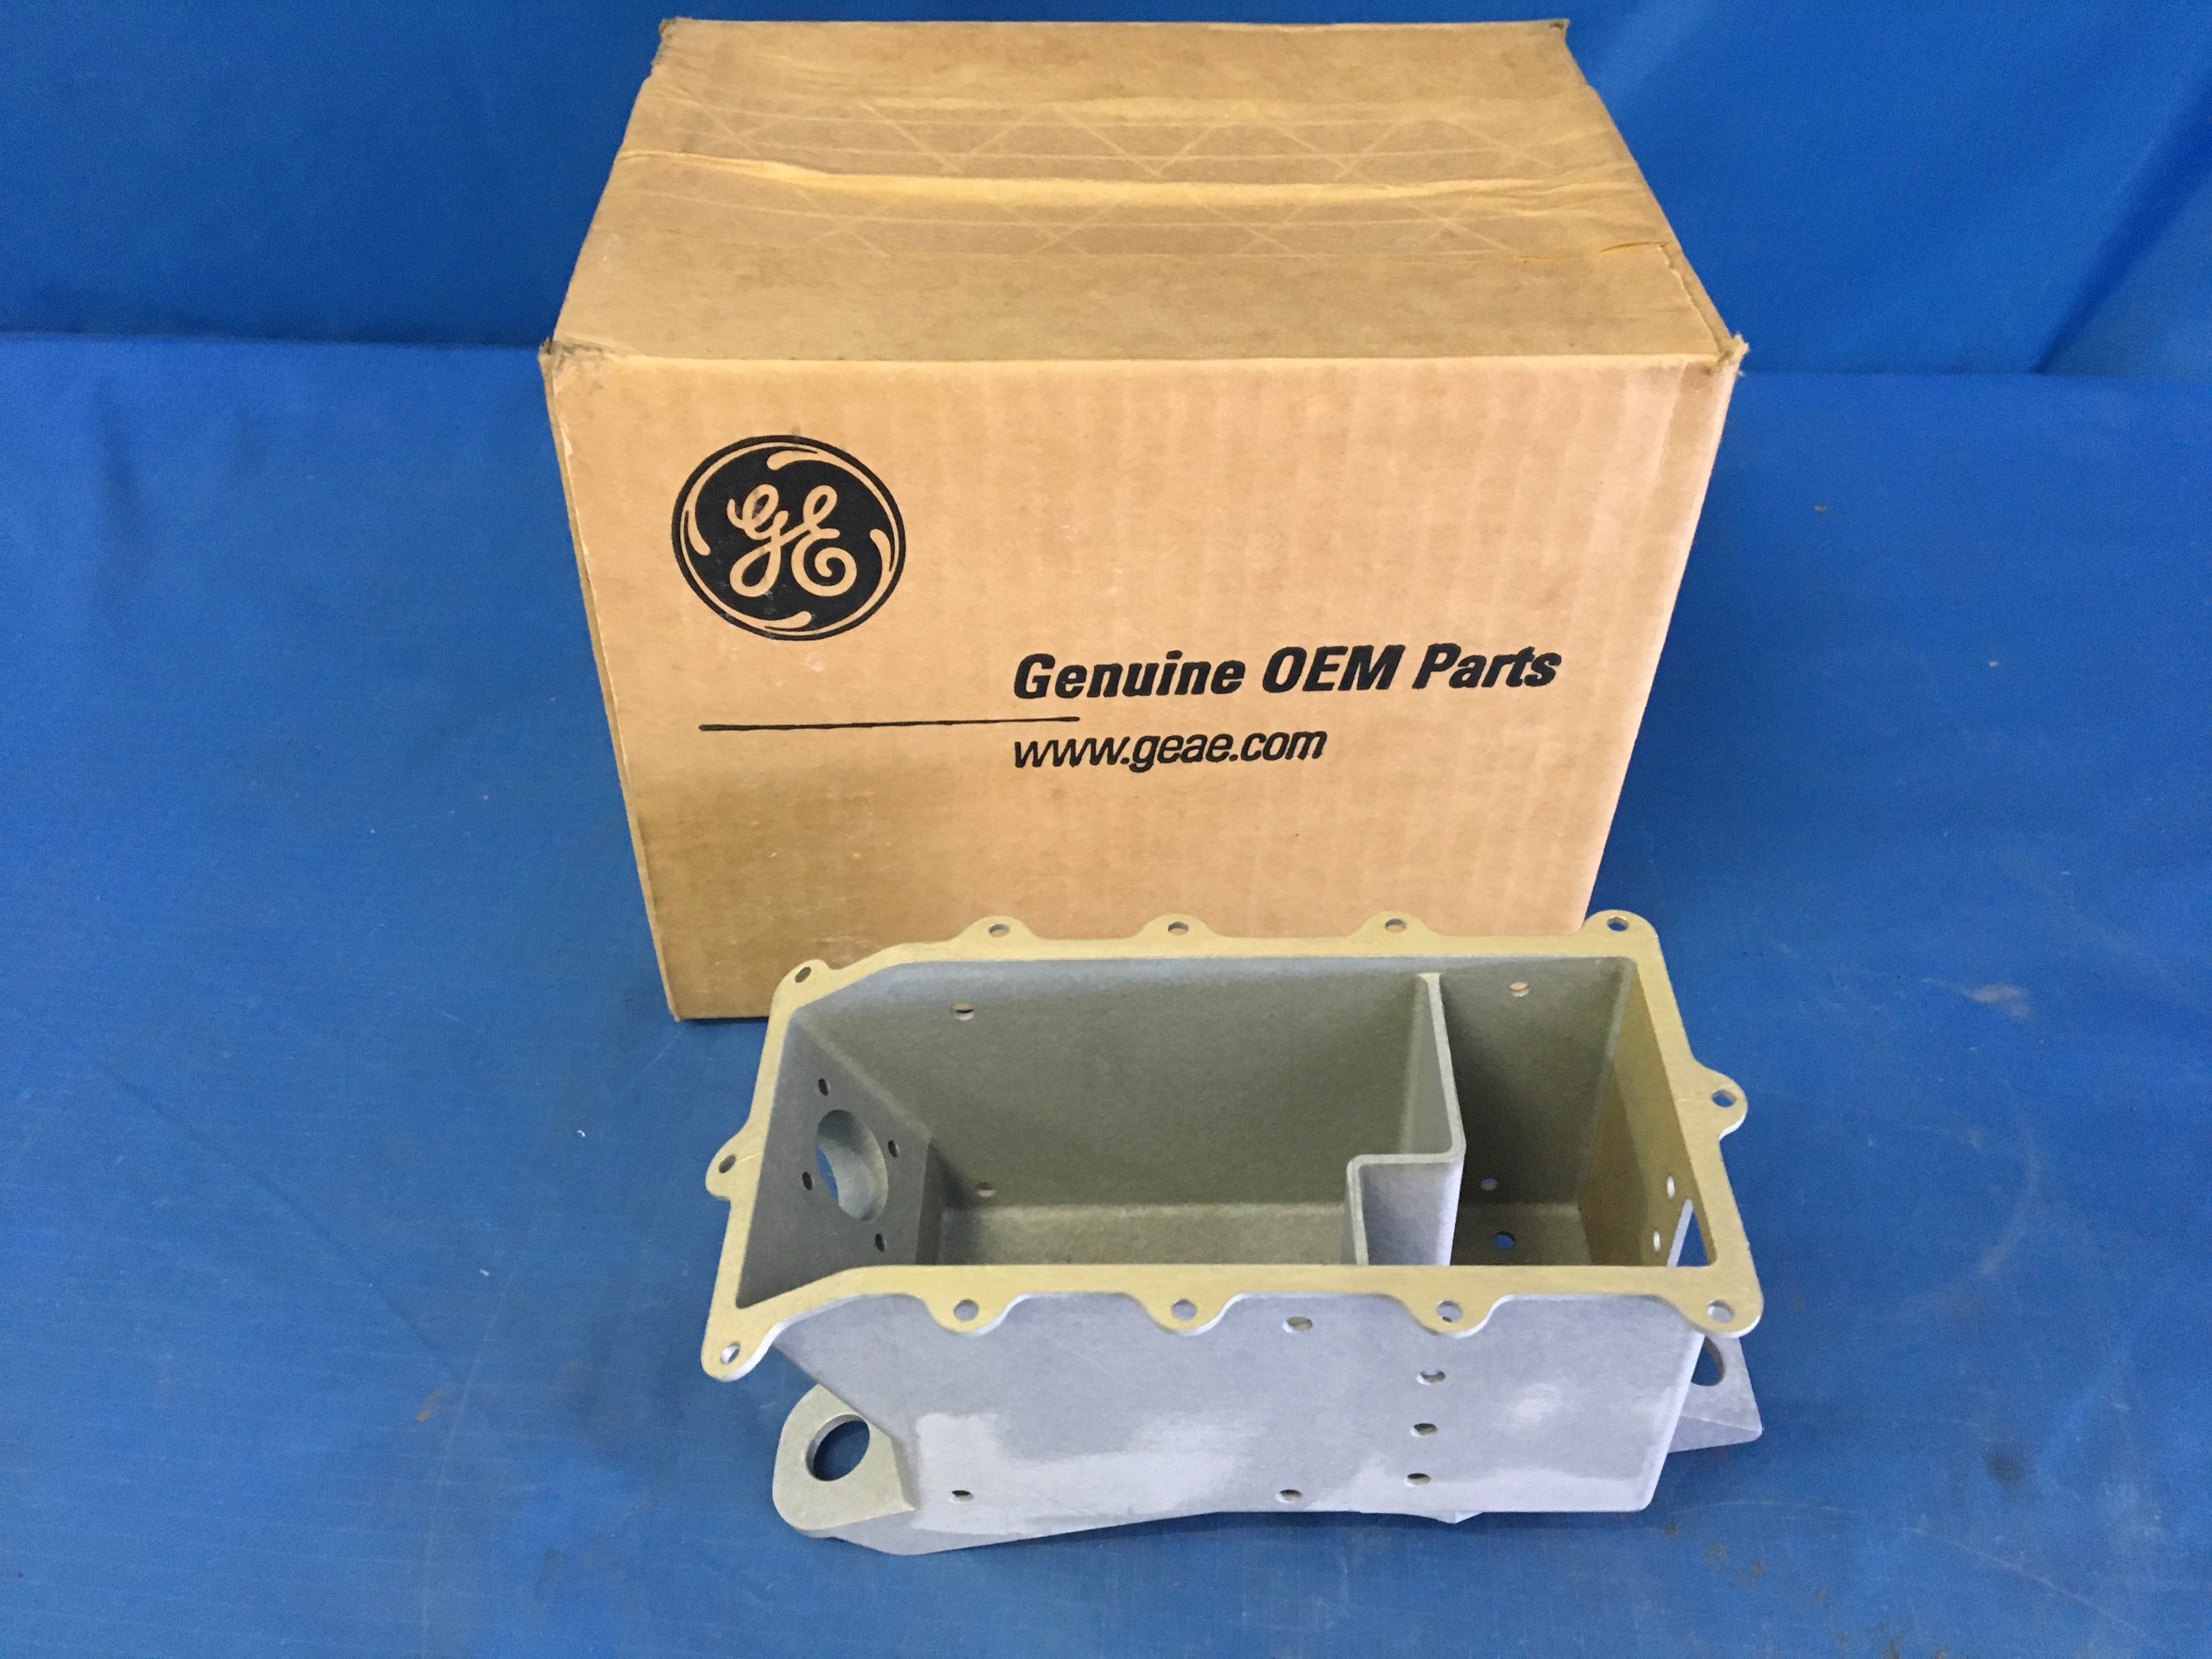 General Electric 7045M67P02 Electrical Equipment Drawer NSN:5975-01-089-4281